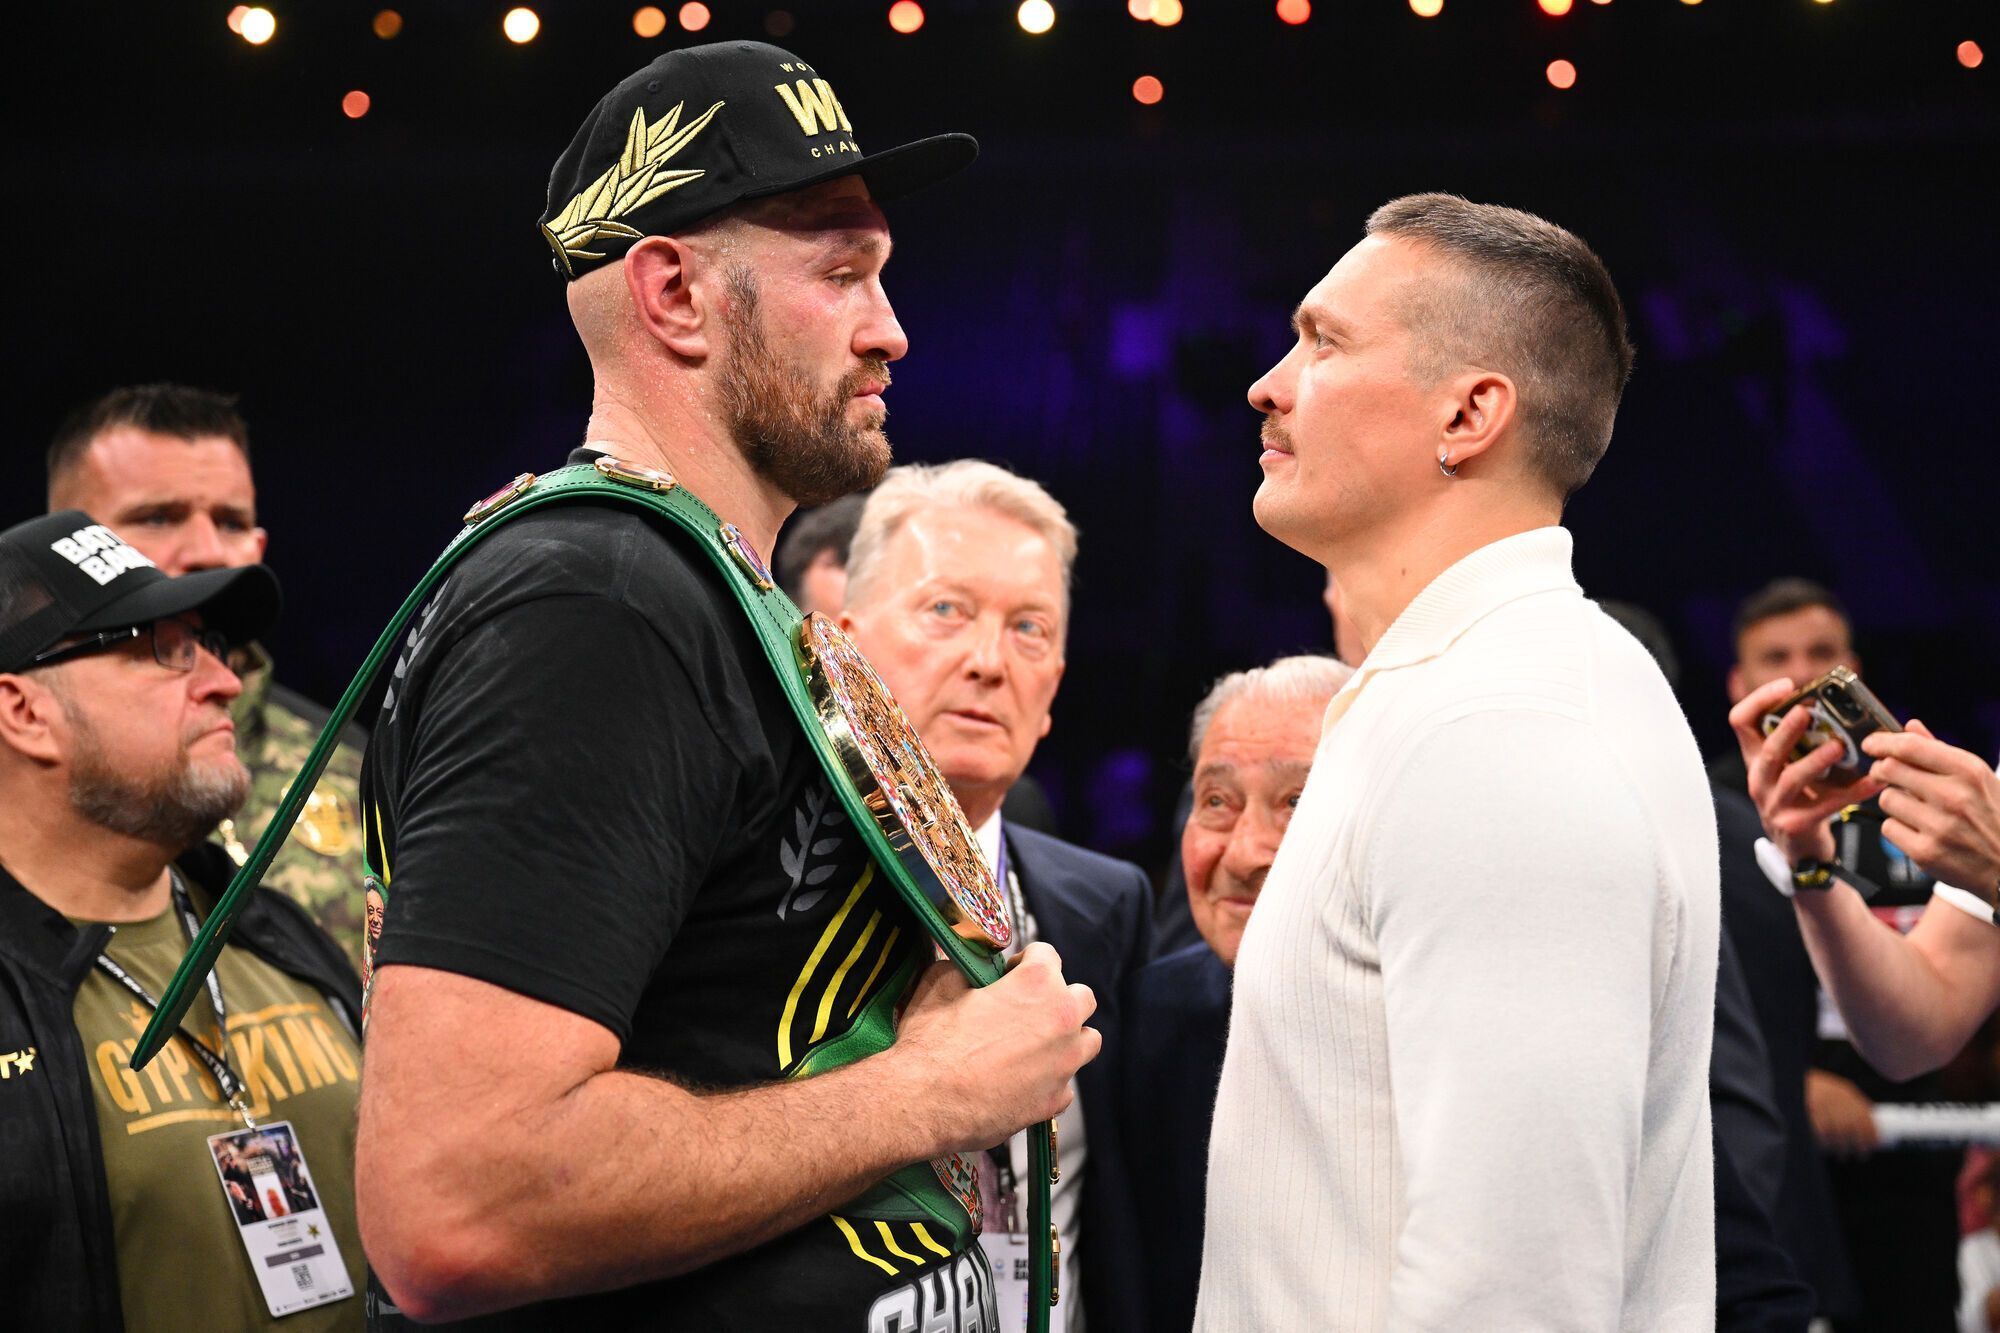 ''This has never happened before'': Fury admits for the first time what the fight with Usyk means